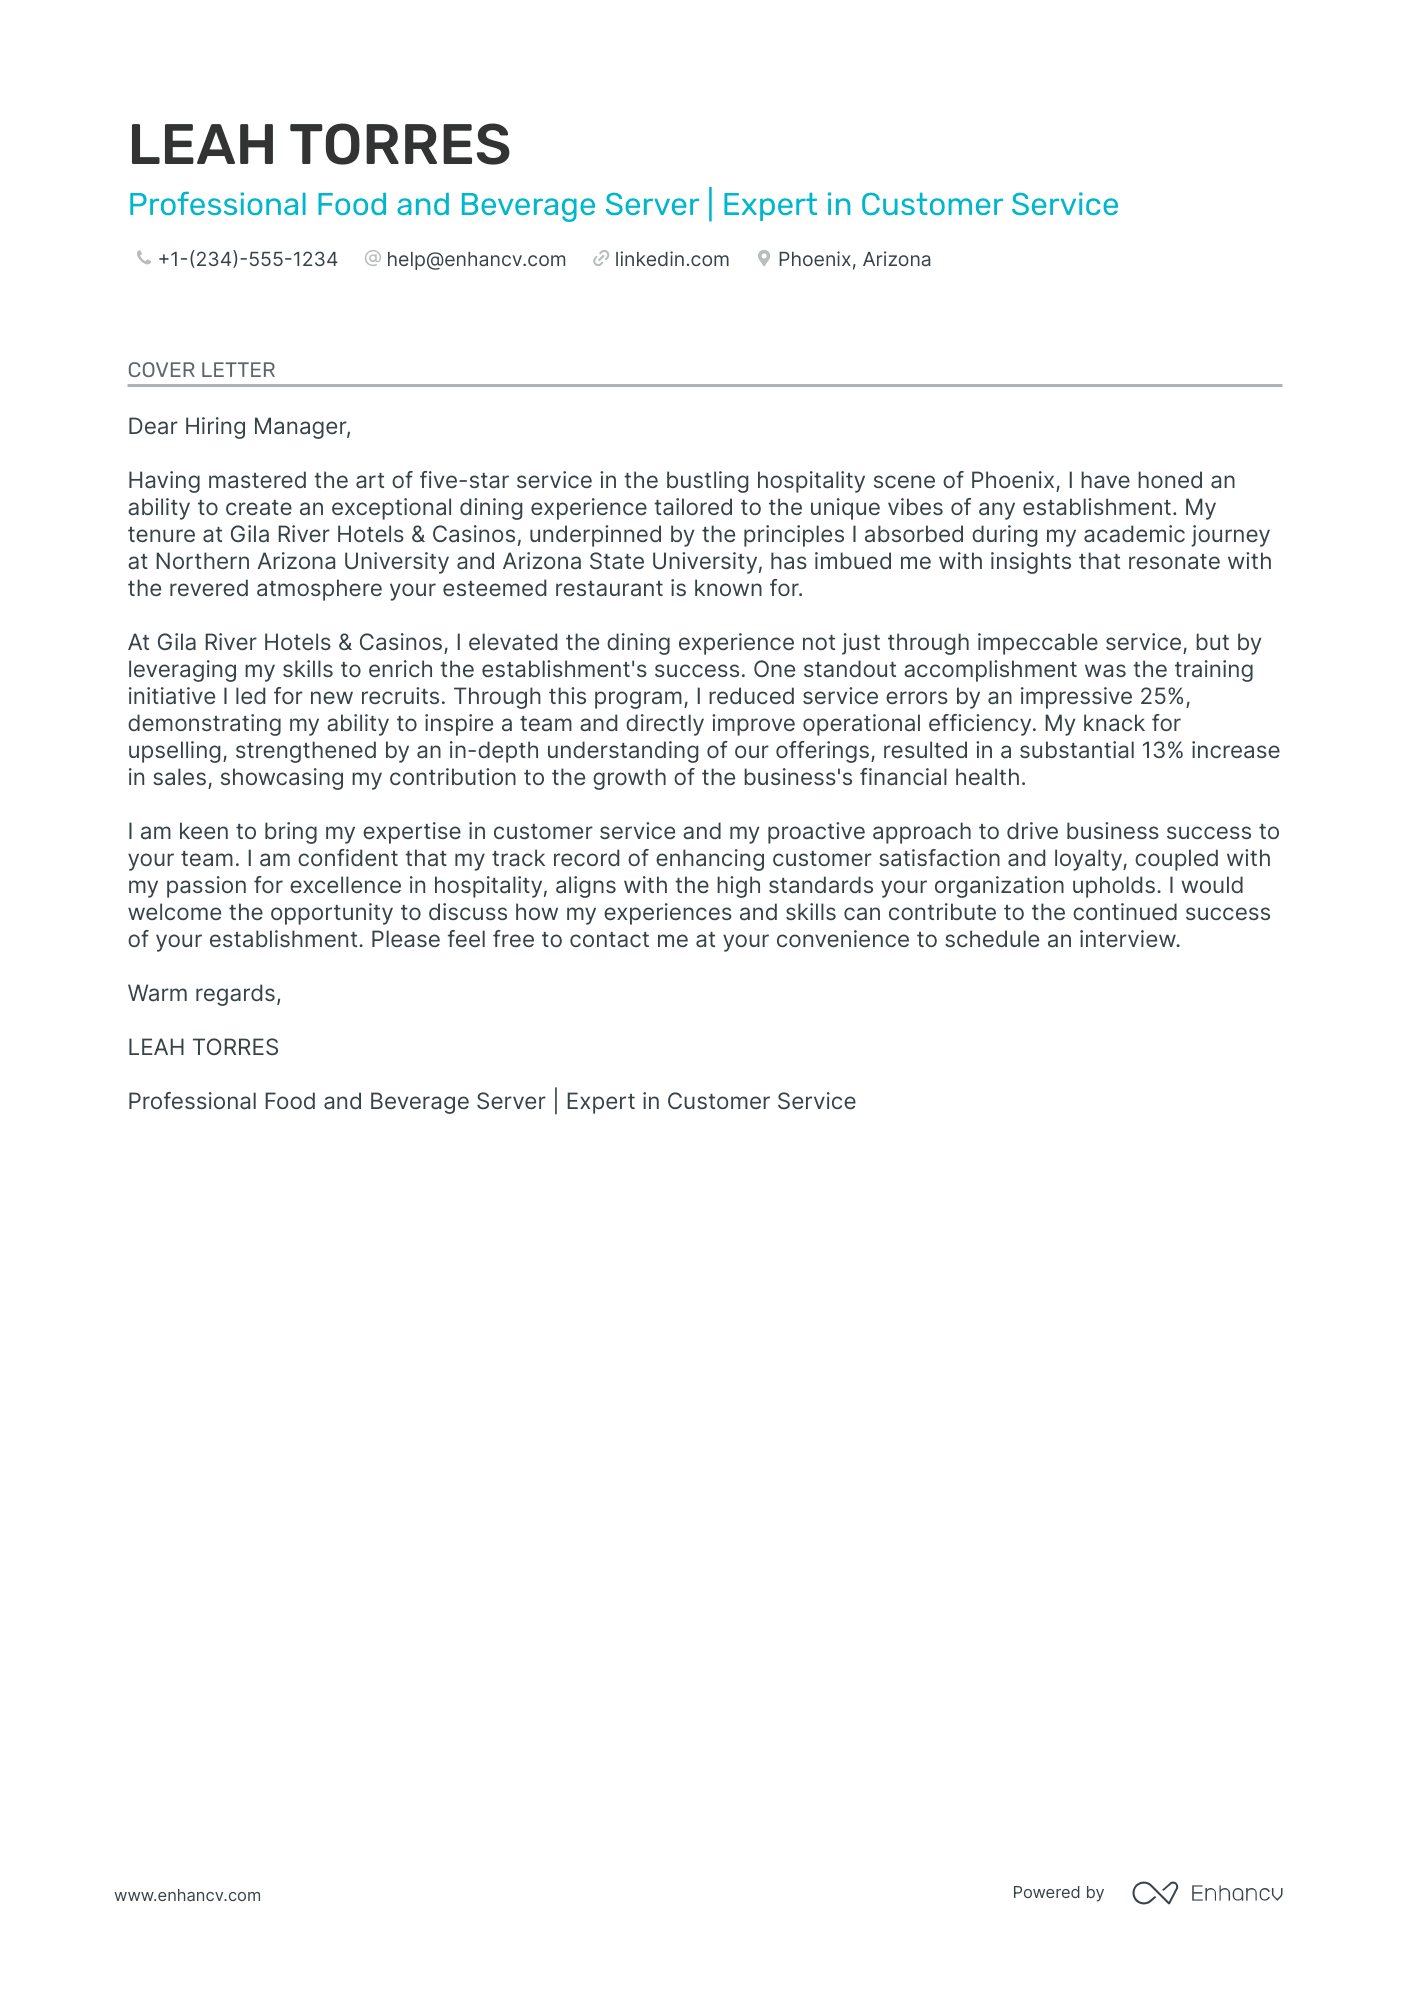 cover letter about waiter